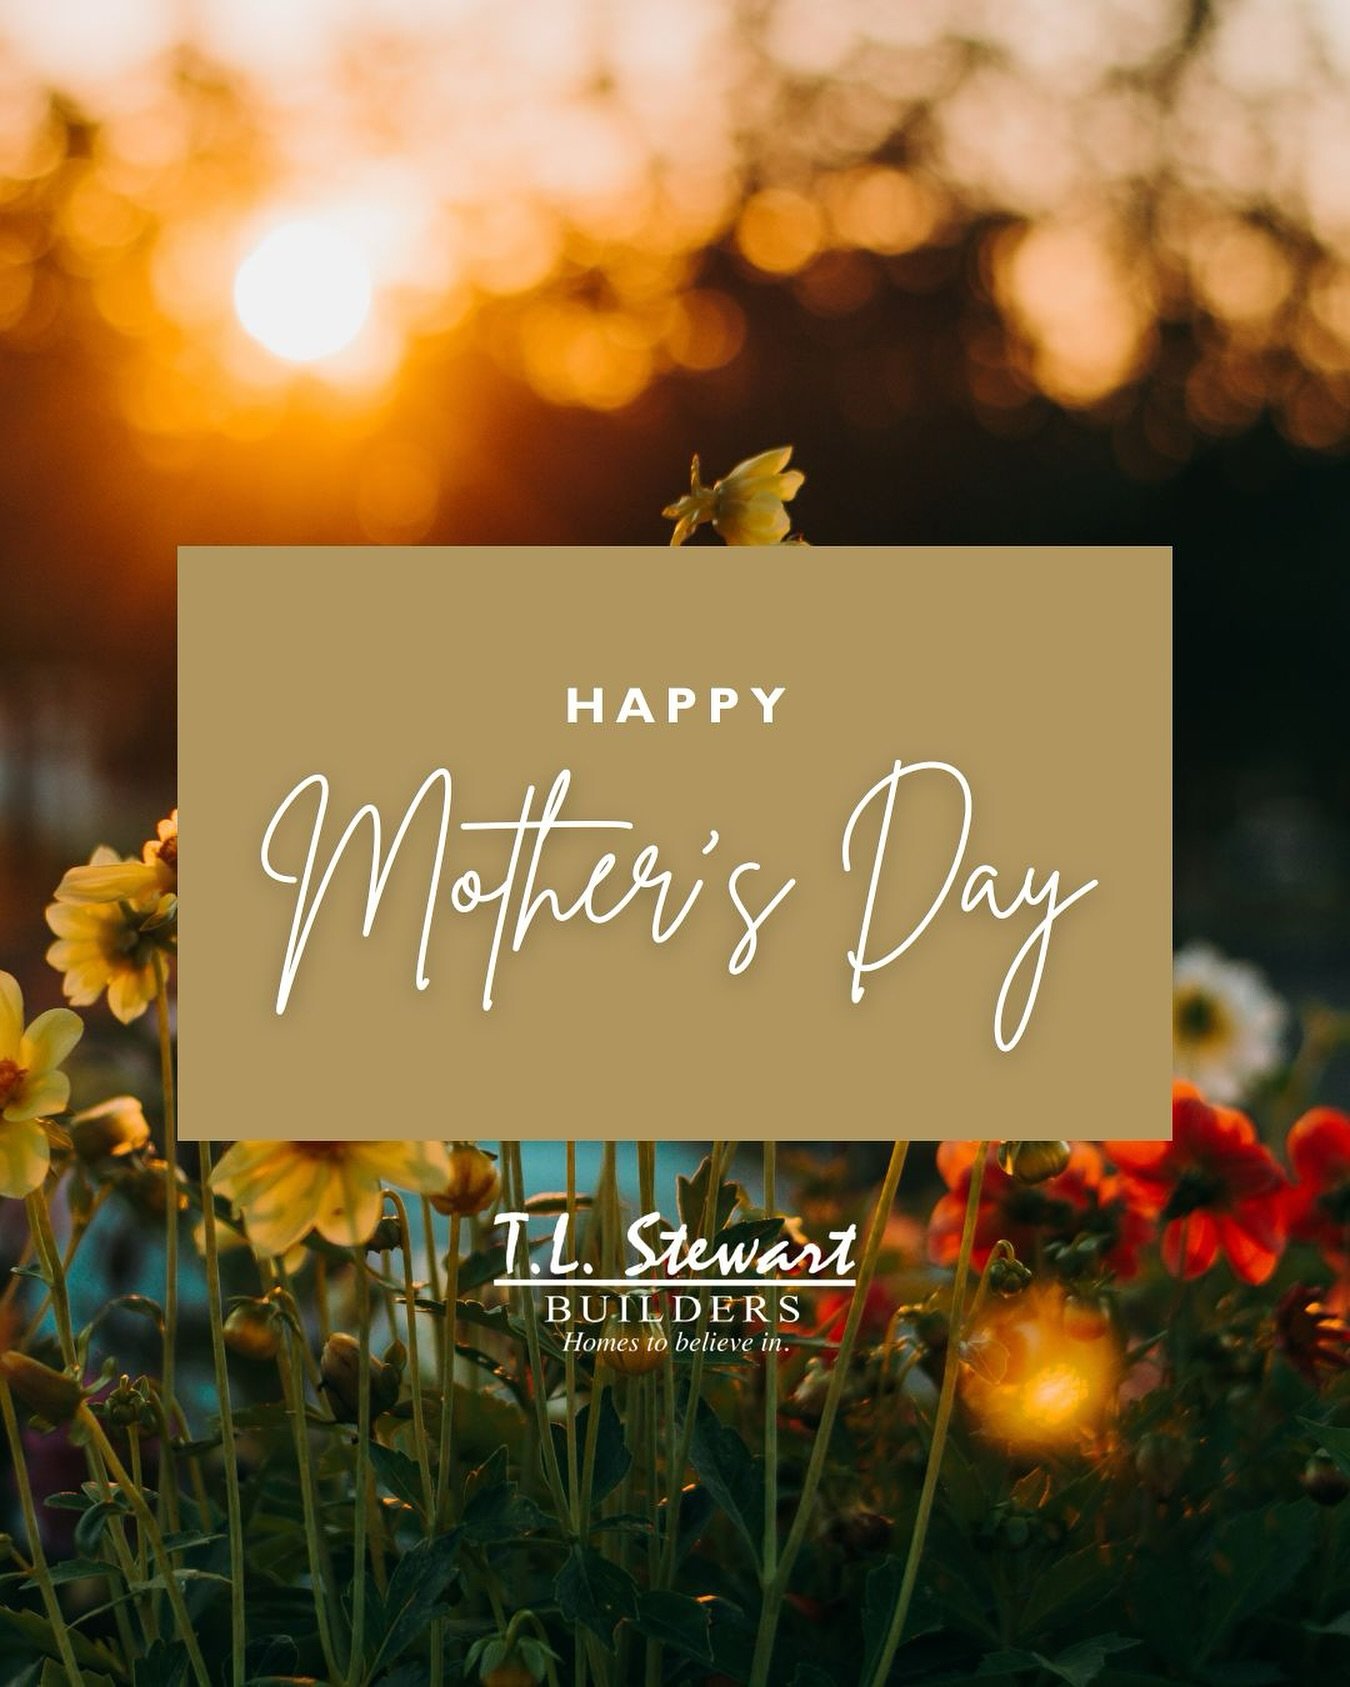 Happy Mother&rsquo;s Day from the TL Stewart Builders family! 🌸

Wishing all the incredible moms out there a day filled with love and joy! We&rsquo;re grateful for all that you do! 🤎

.
.
.
.
#happymothersday #mothersday #ncmoms